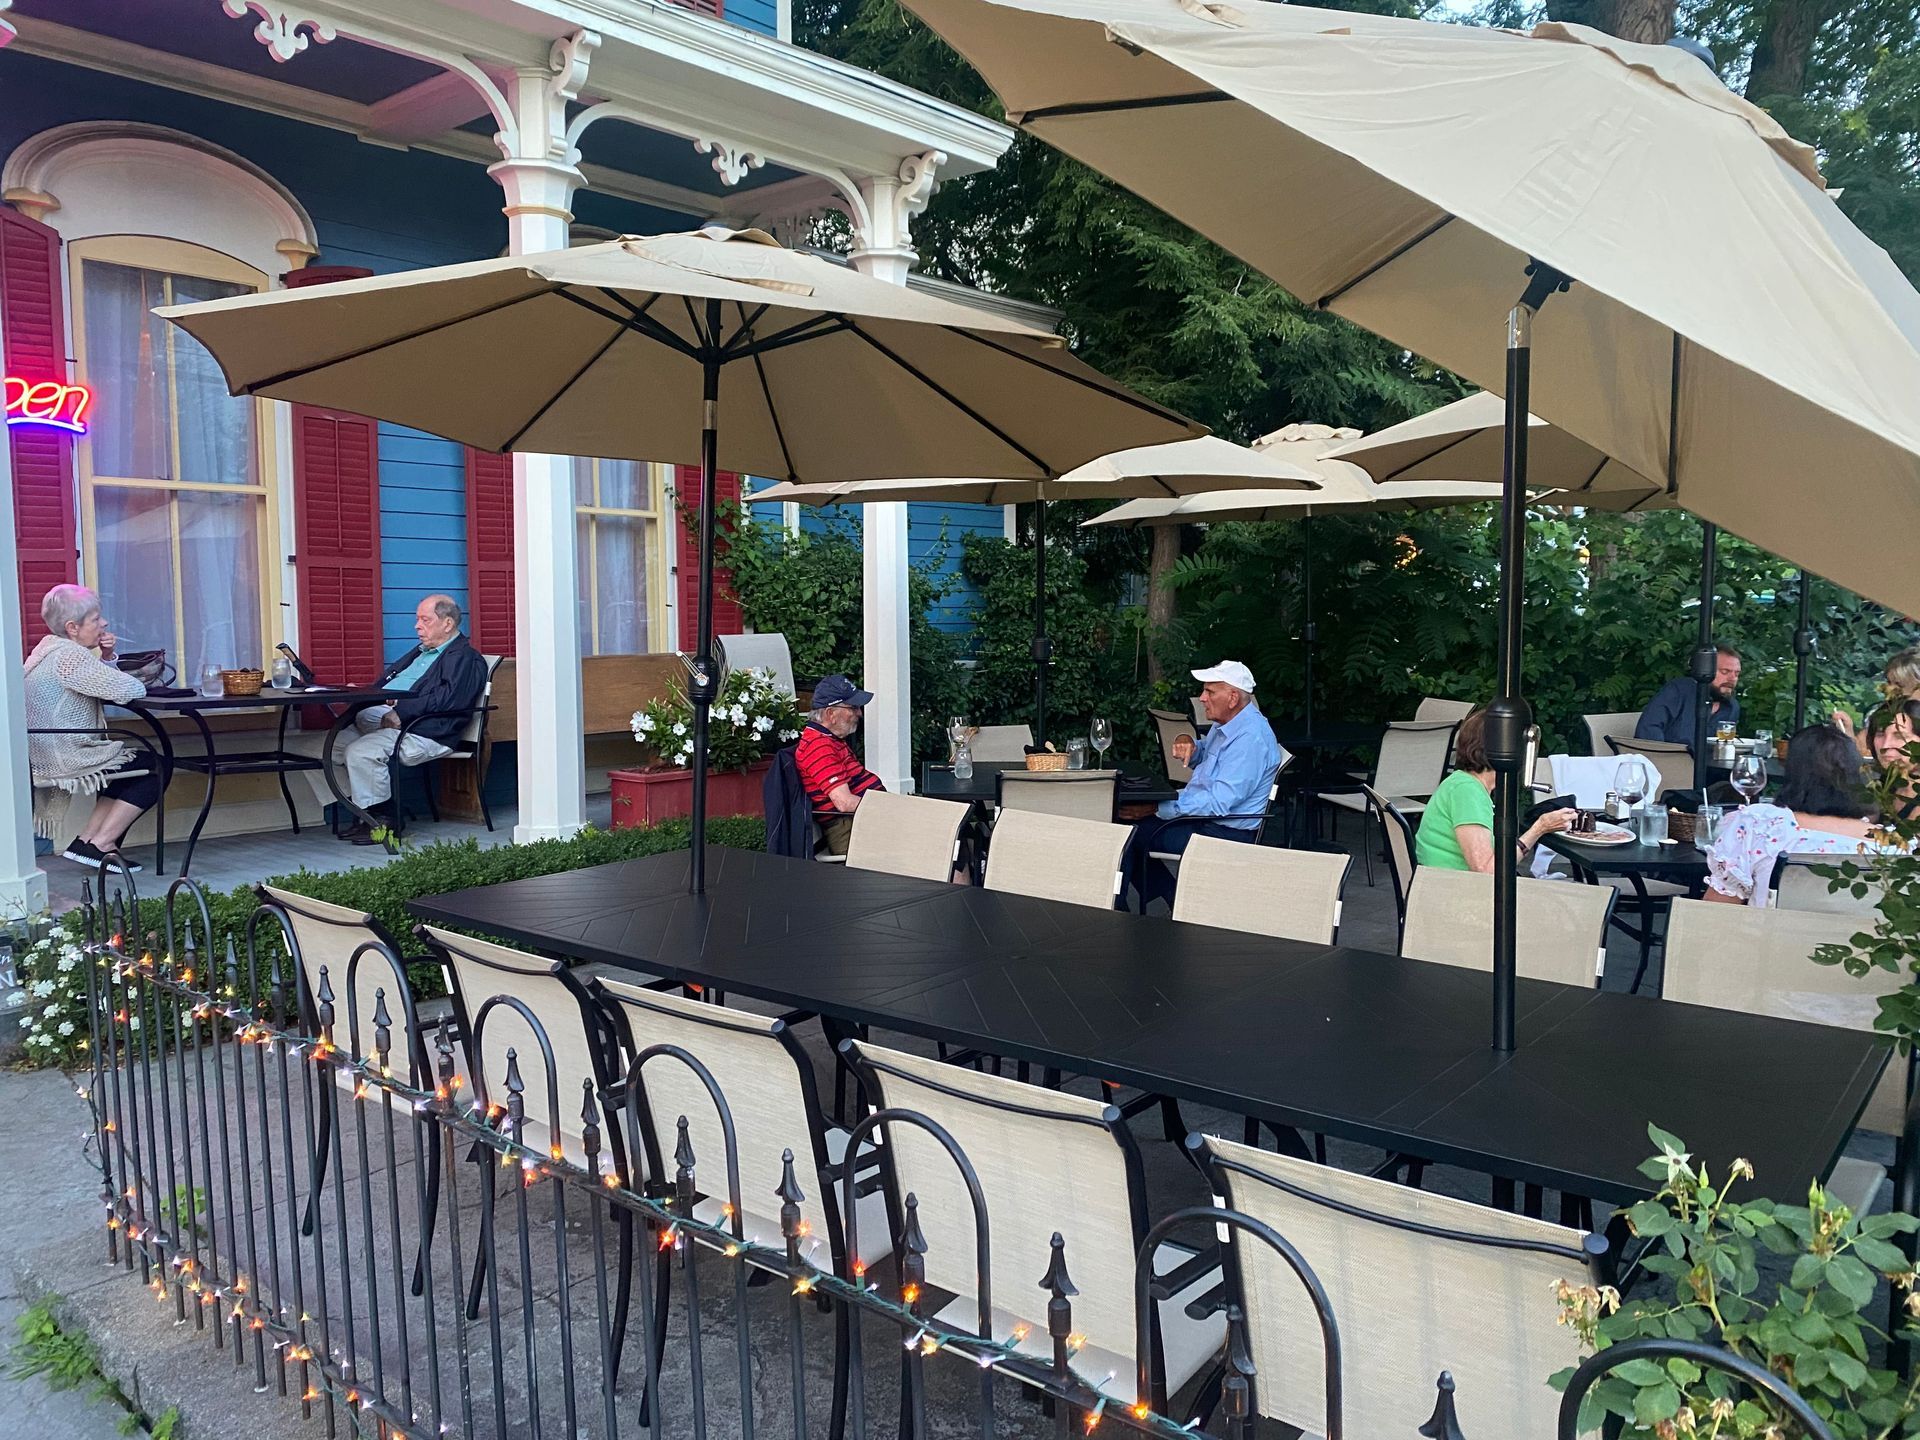 A group of people are sitting at tables under umbrellas outside of a restaurant.